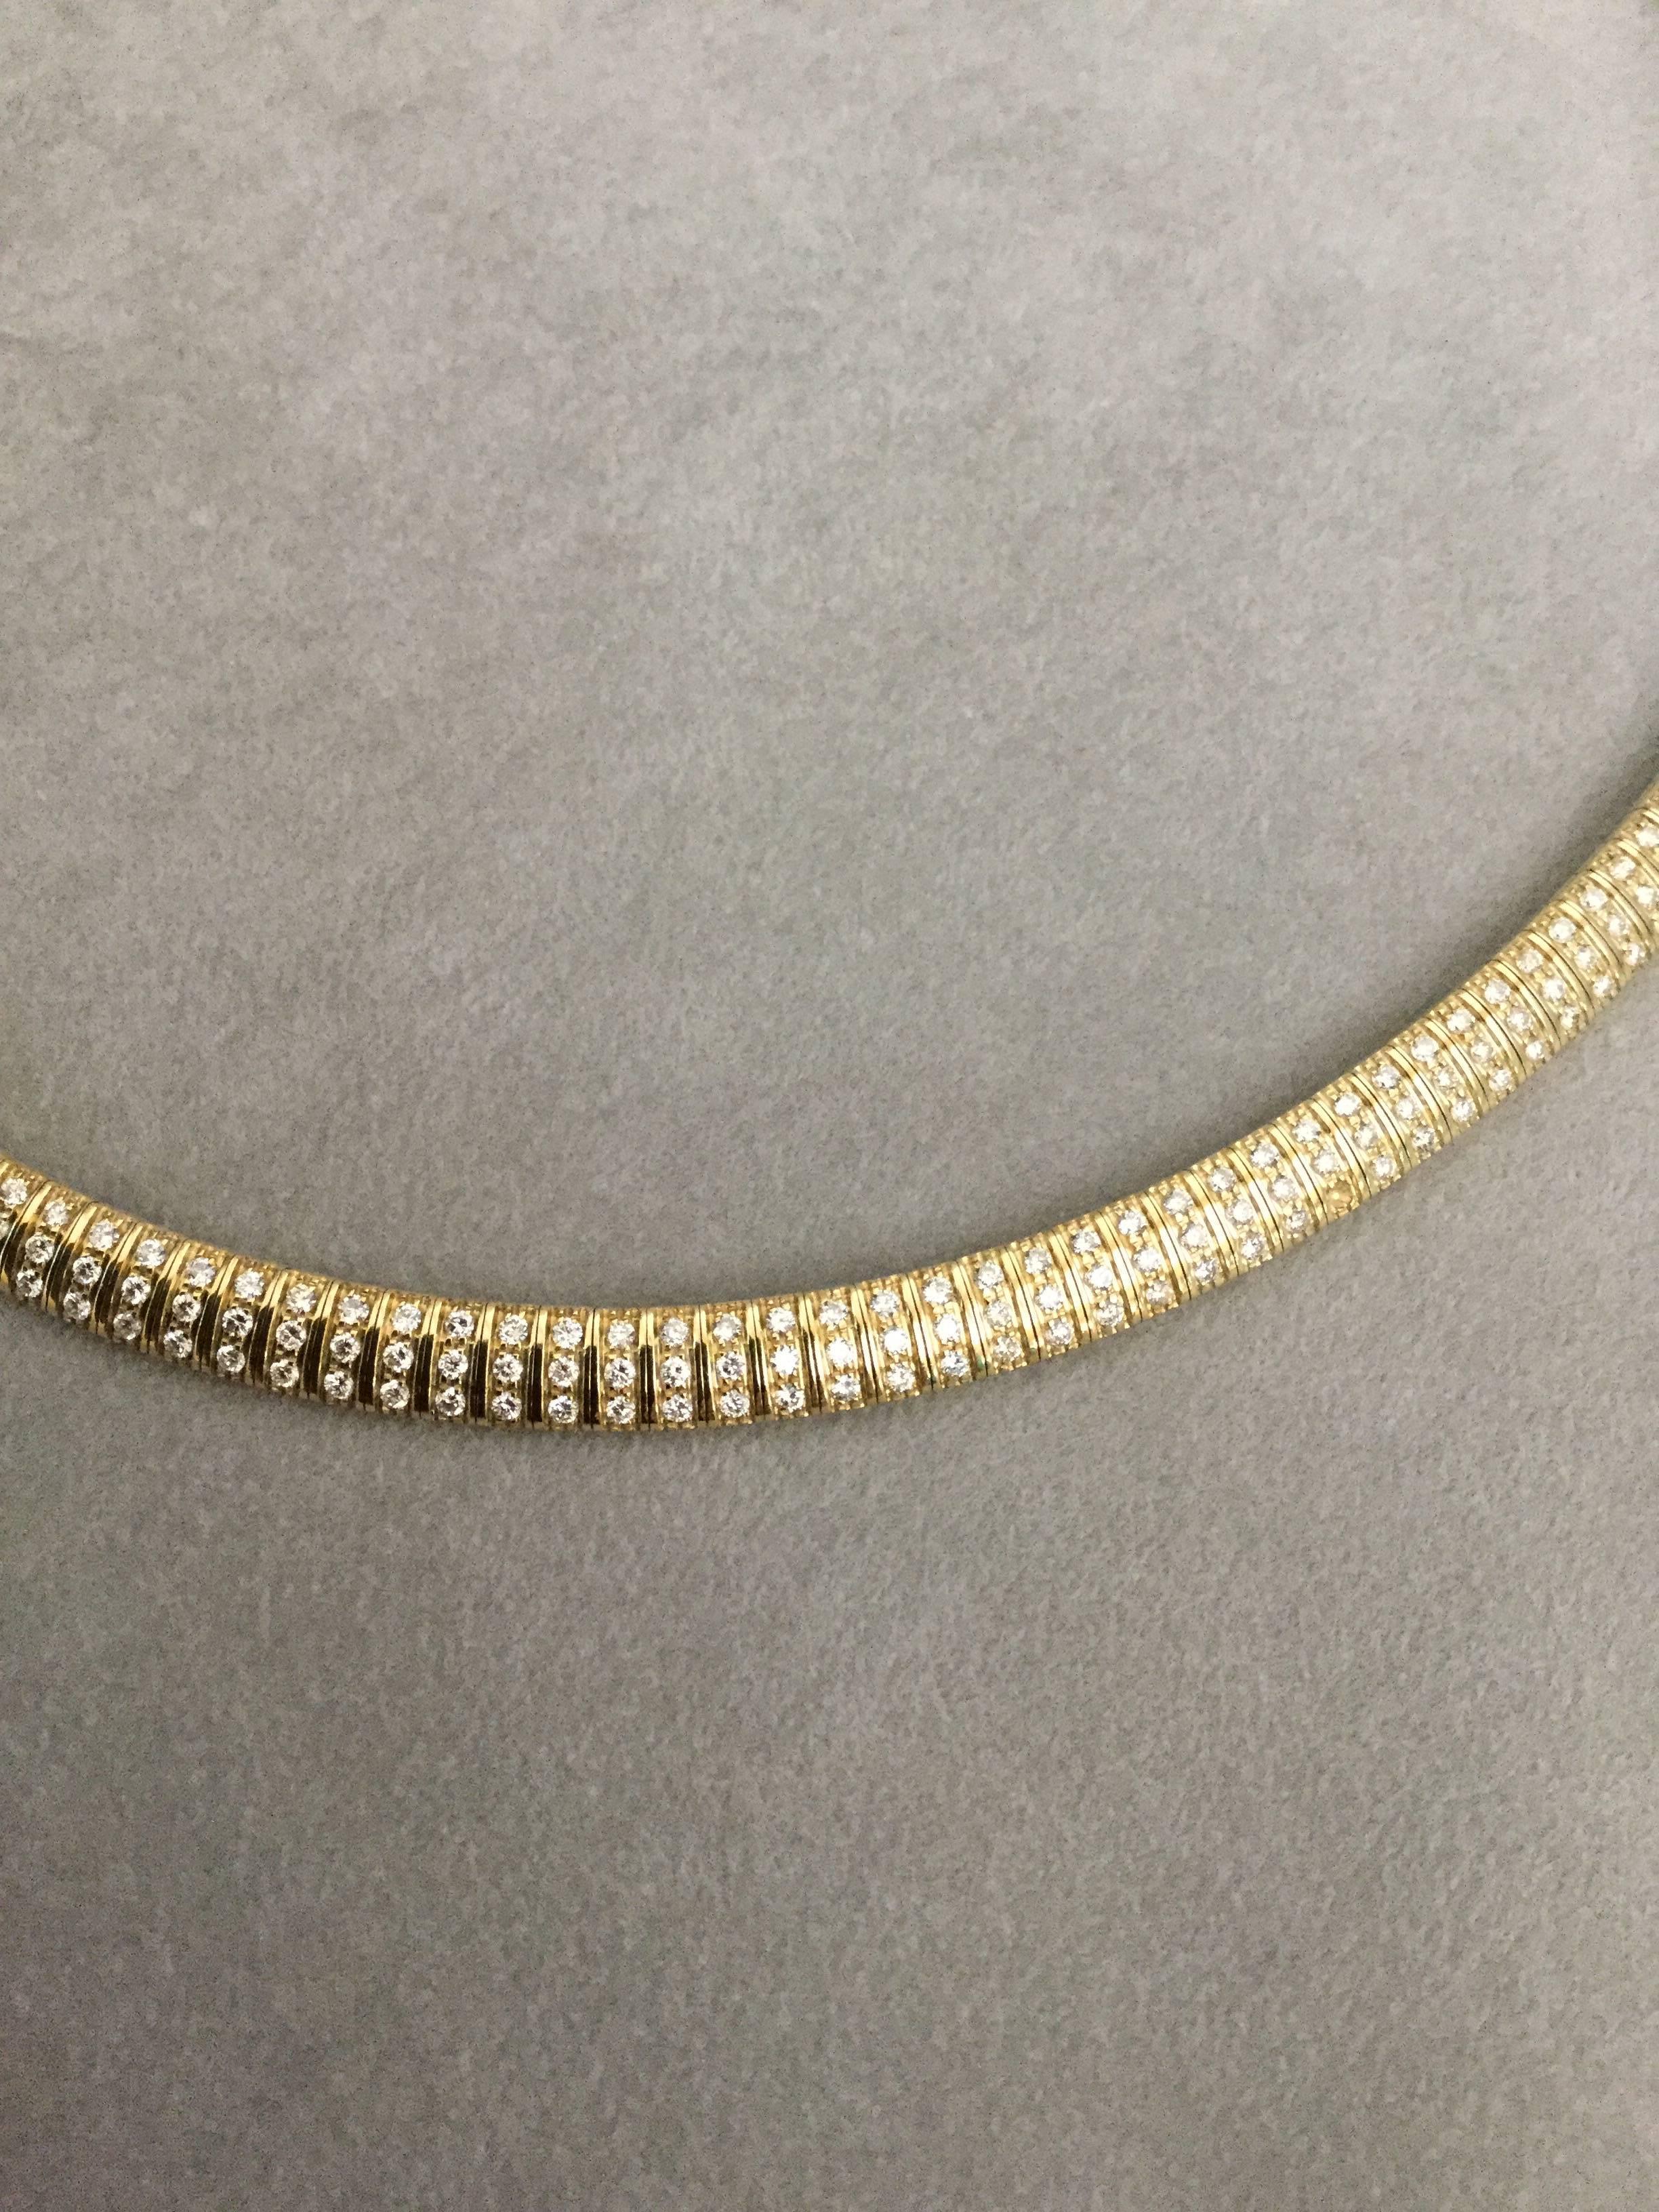 14K yellow gold domed Omega necklace set with 165 diamonds weighing combined 3.95 carats. Statement piece that can be worn casual or dressed up. 
Tip: For formal occasions add an enhancer.

